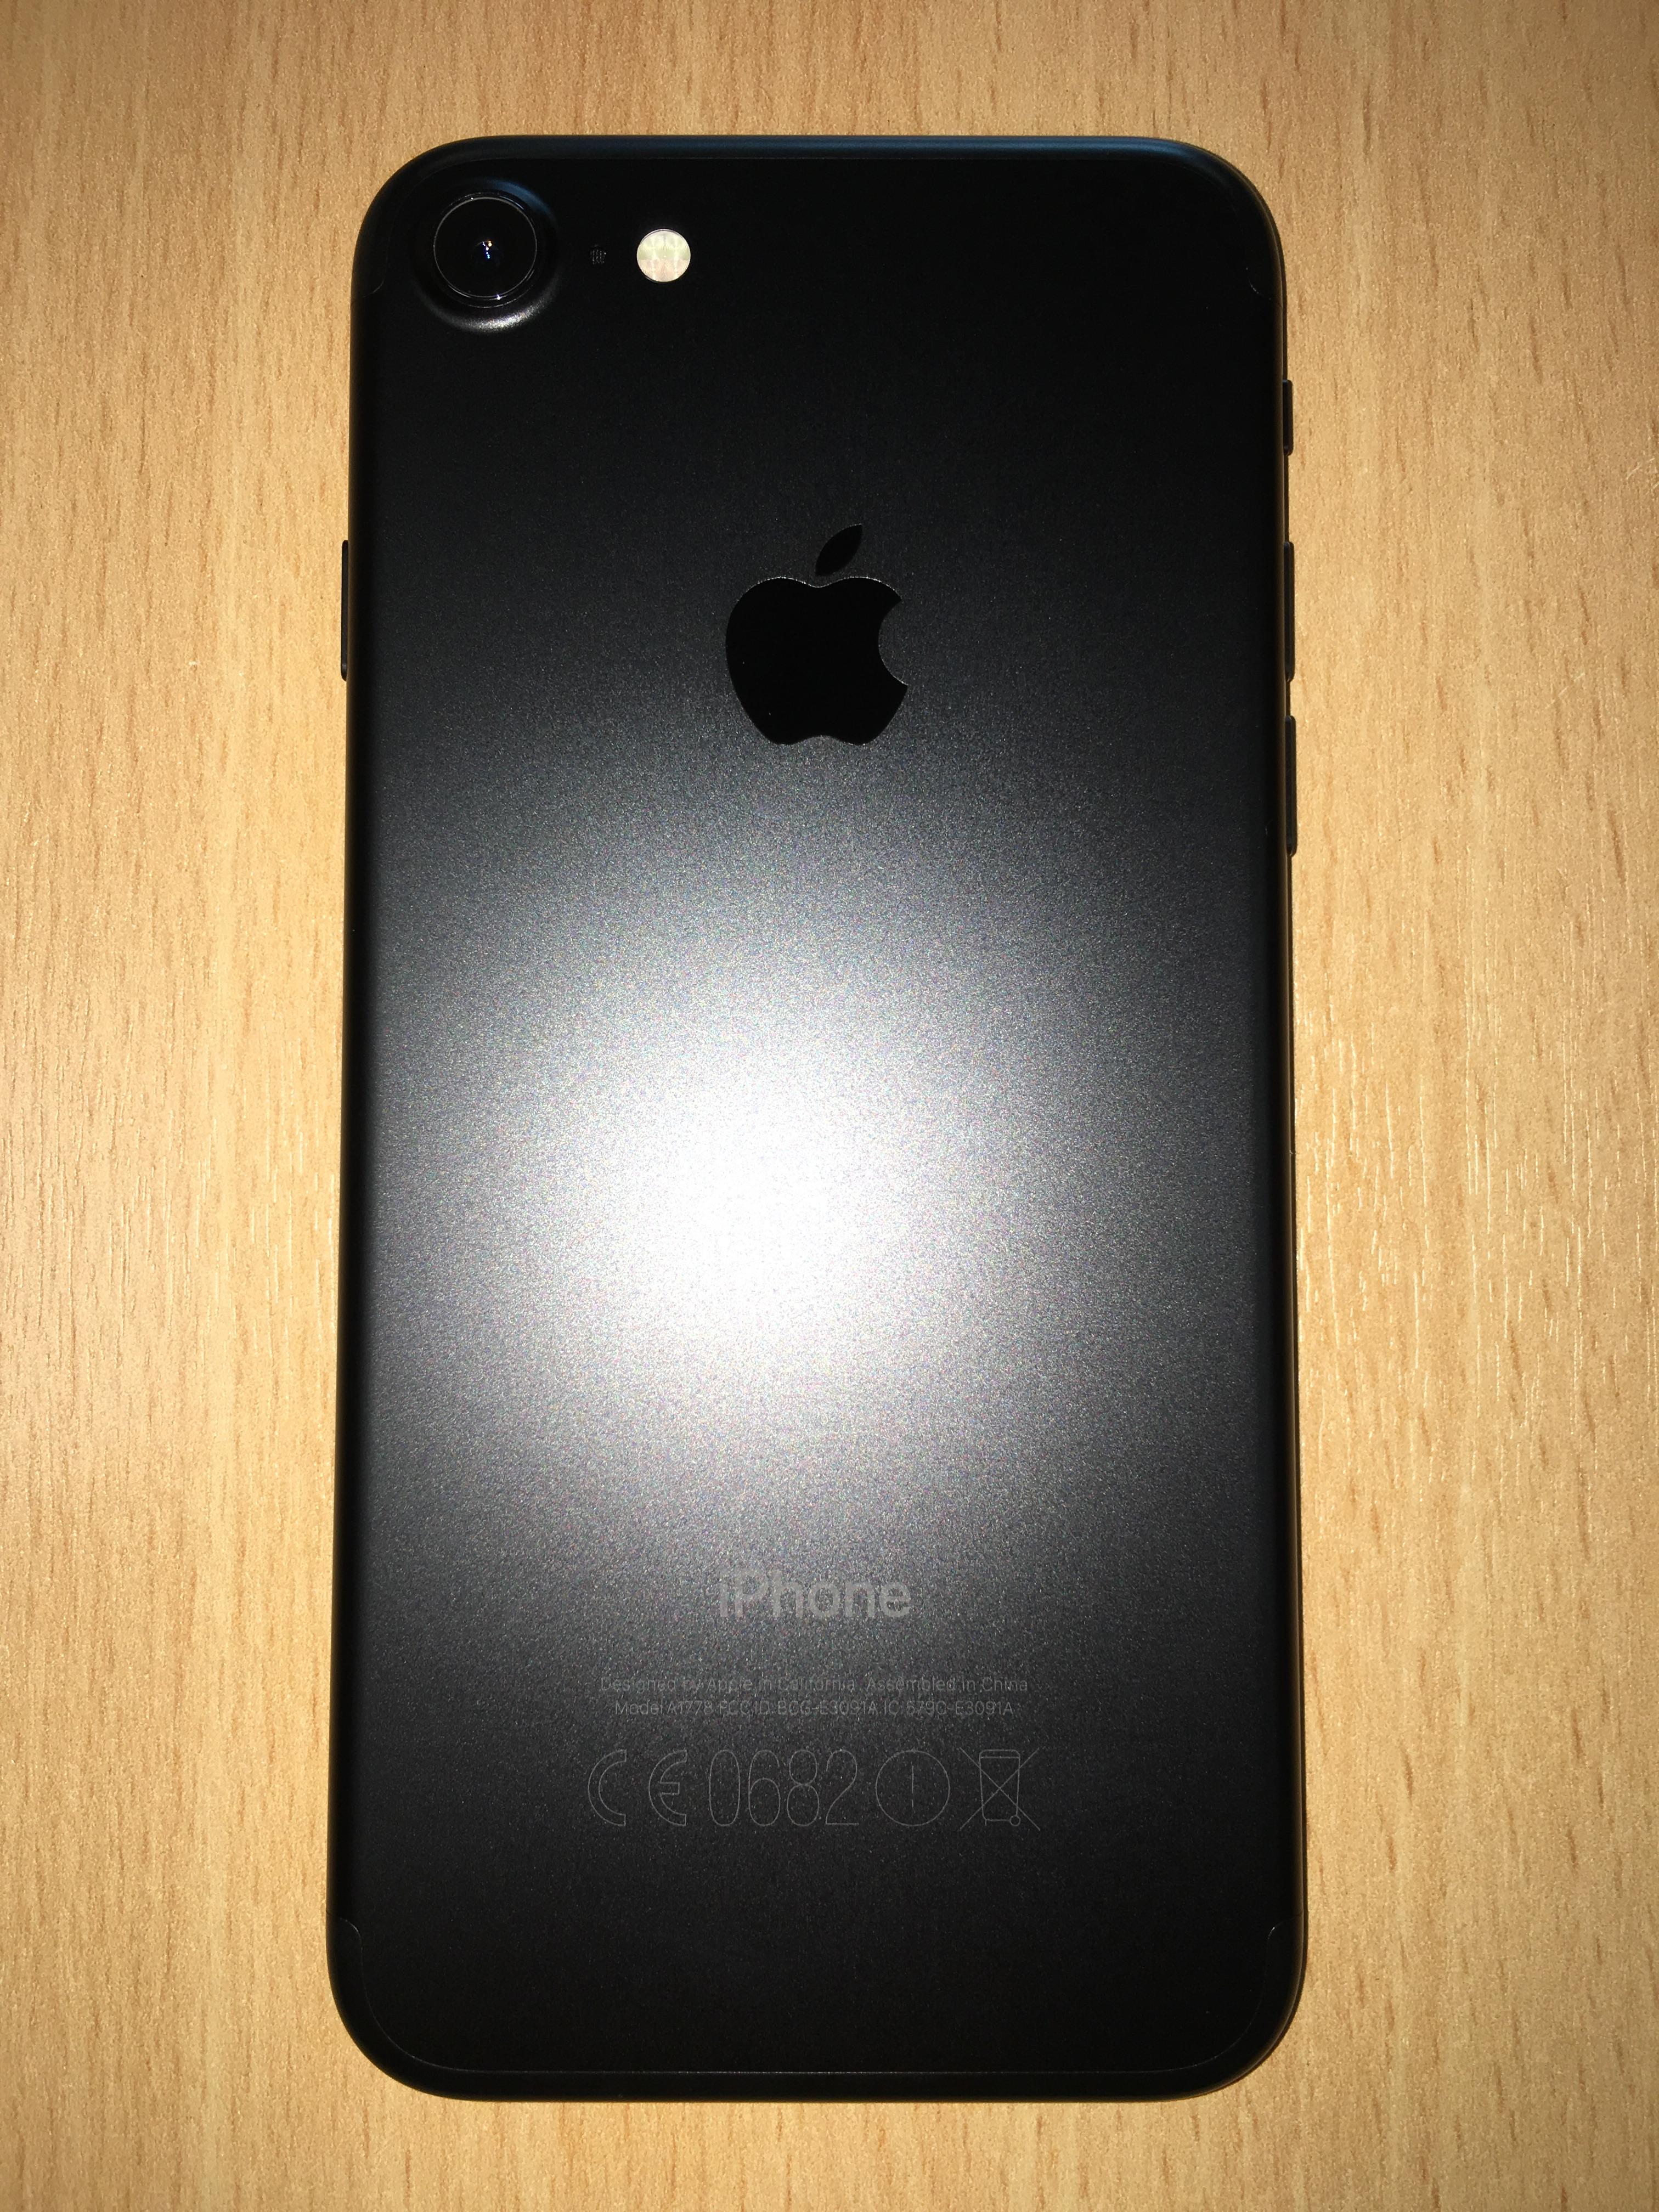 The Black (matte) iPhone 7 is gorgeous : iphone